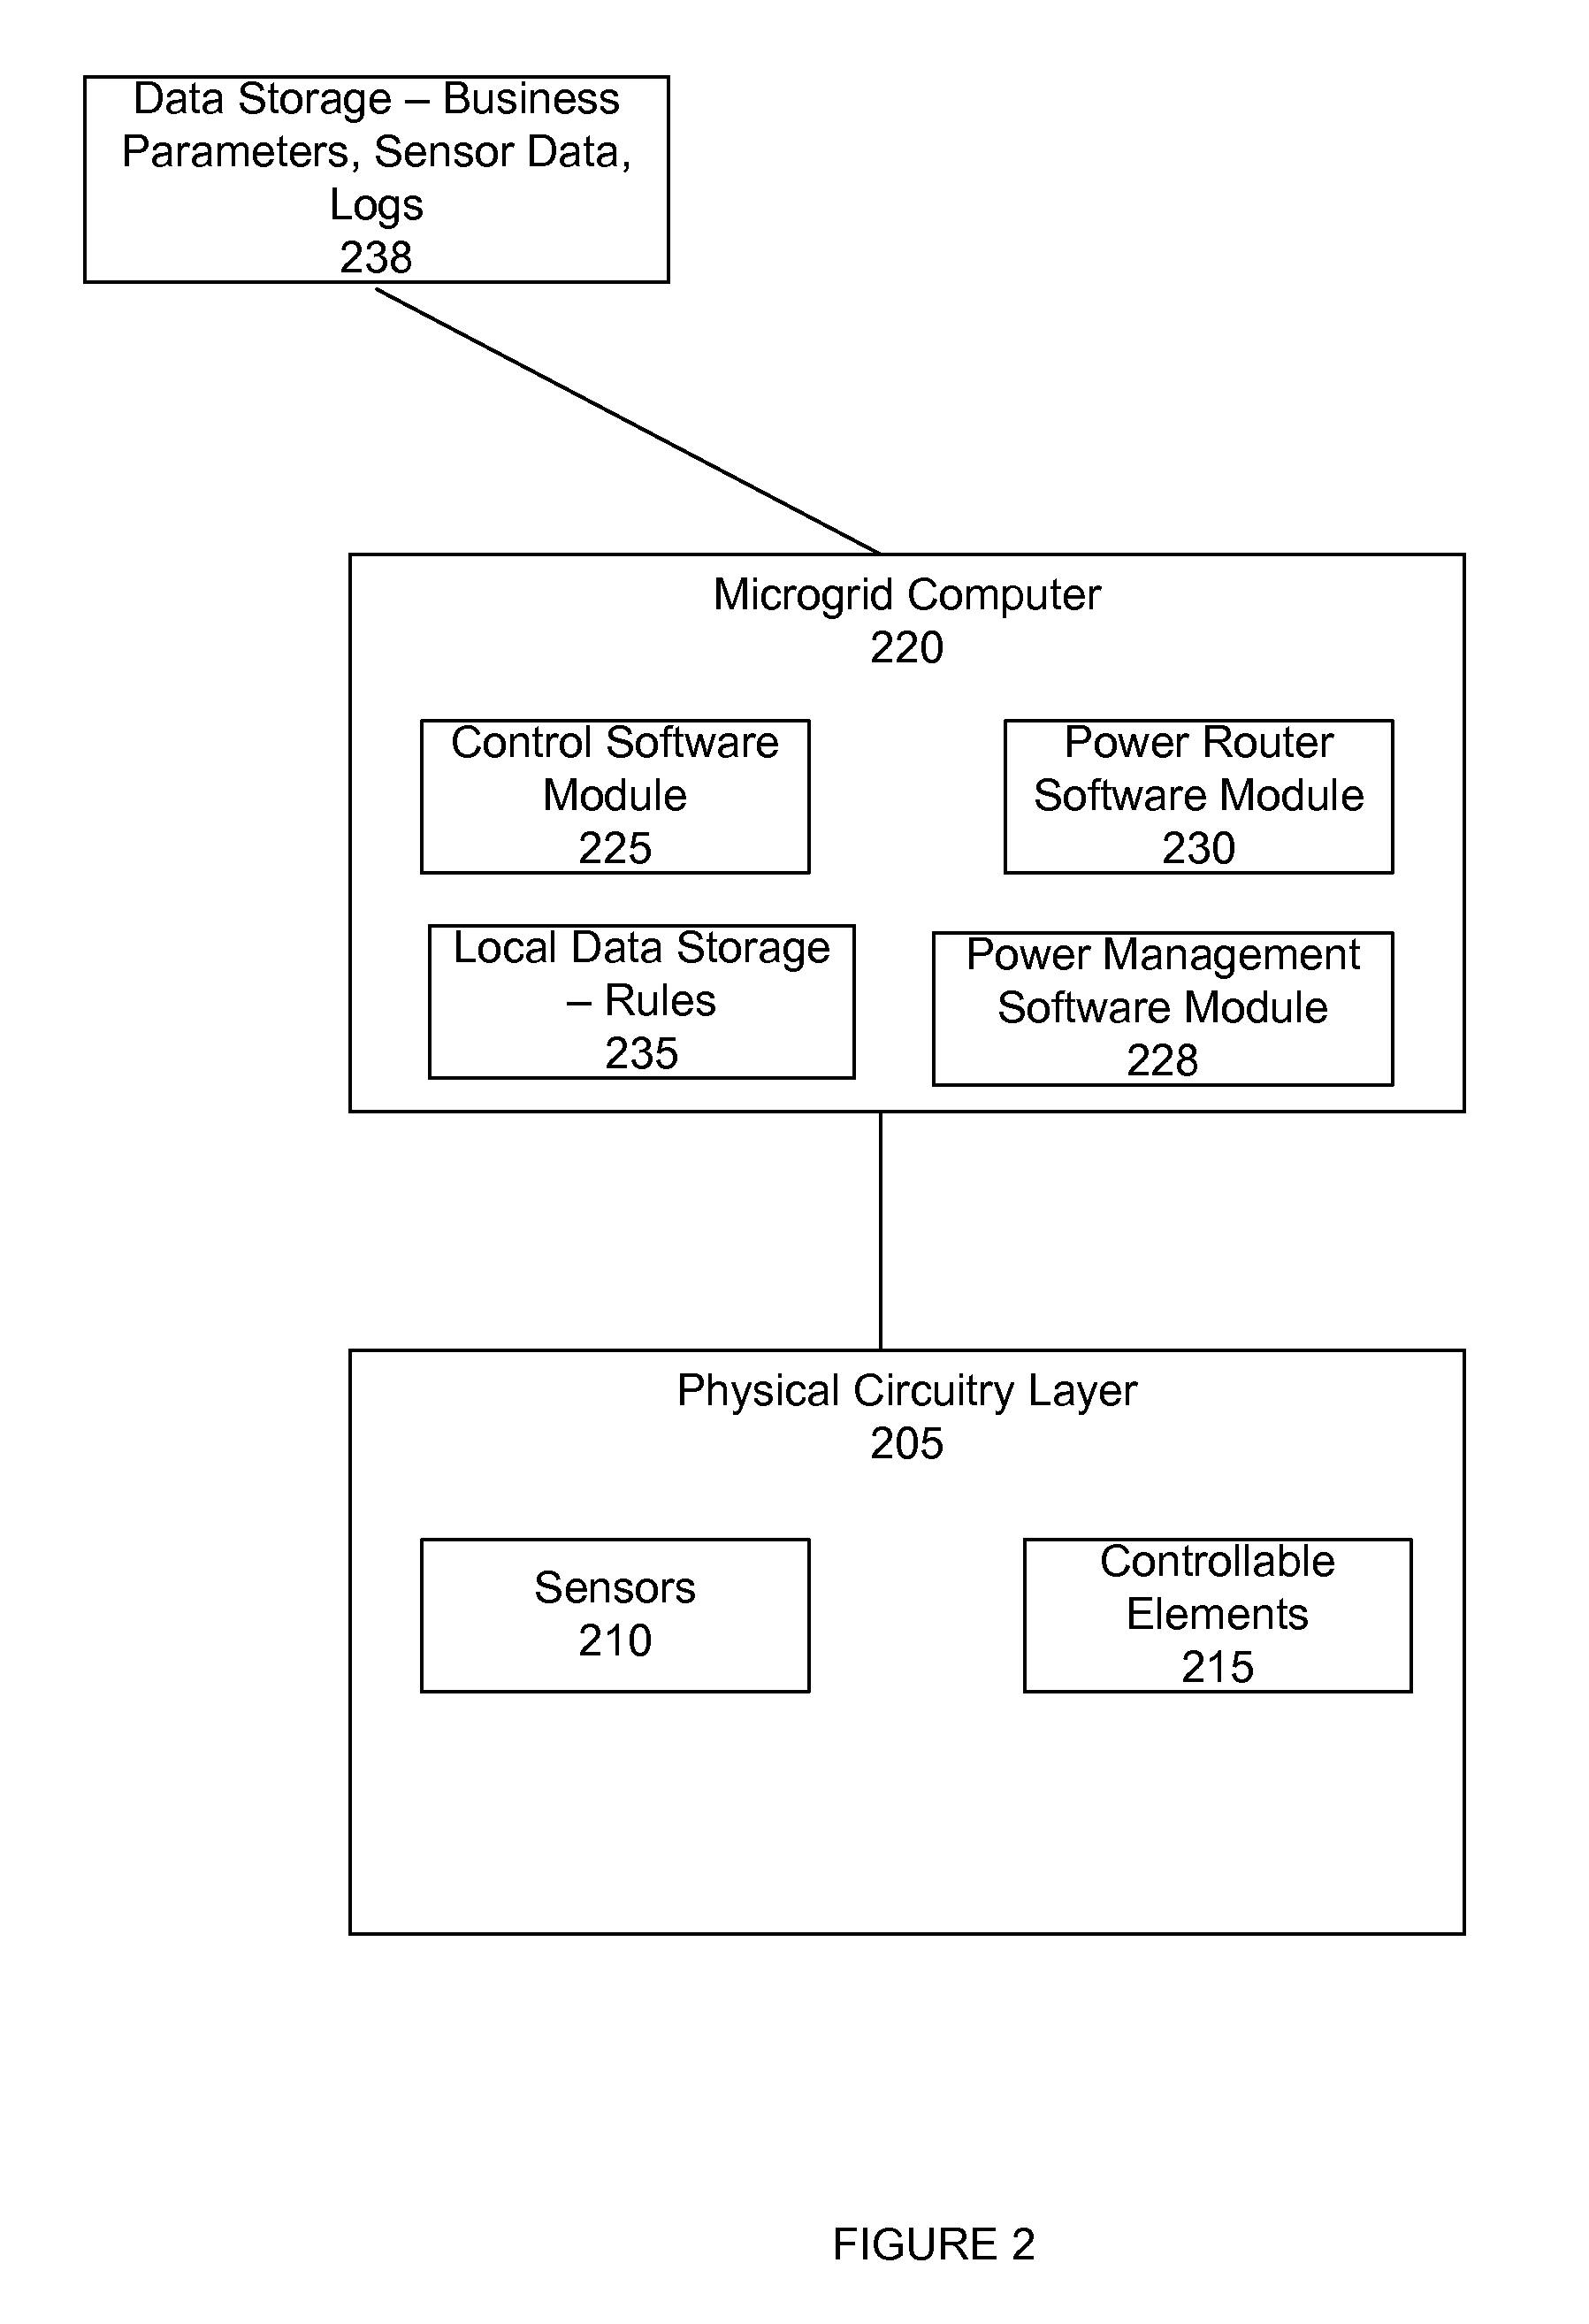 System and method for routing power across multiple microgrids having DC and AC buses